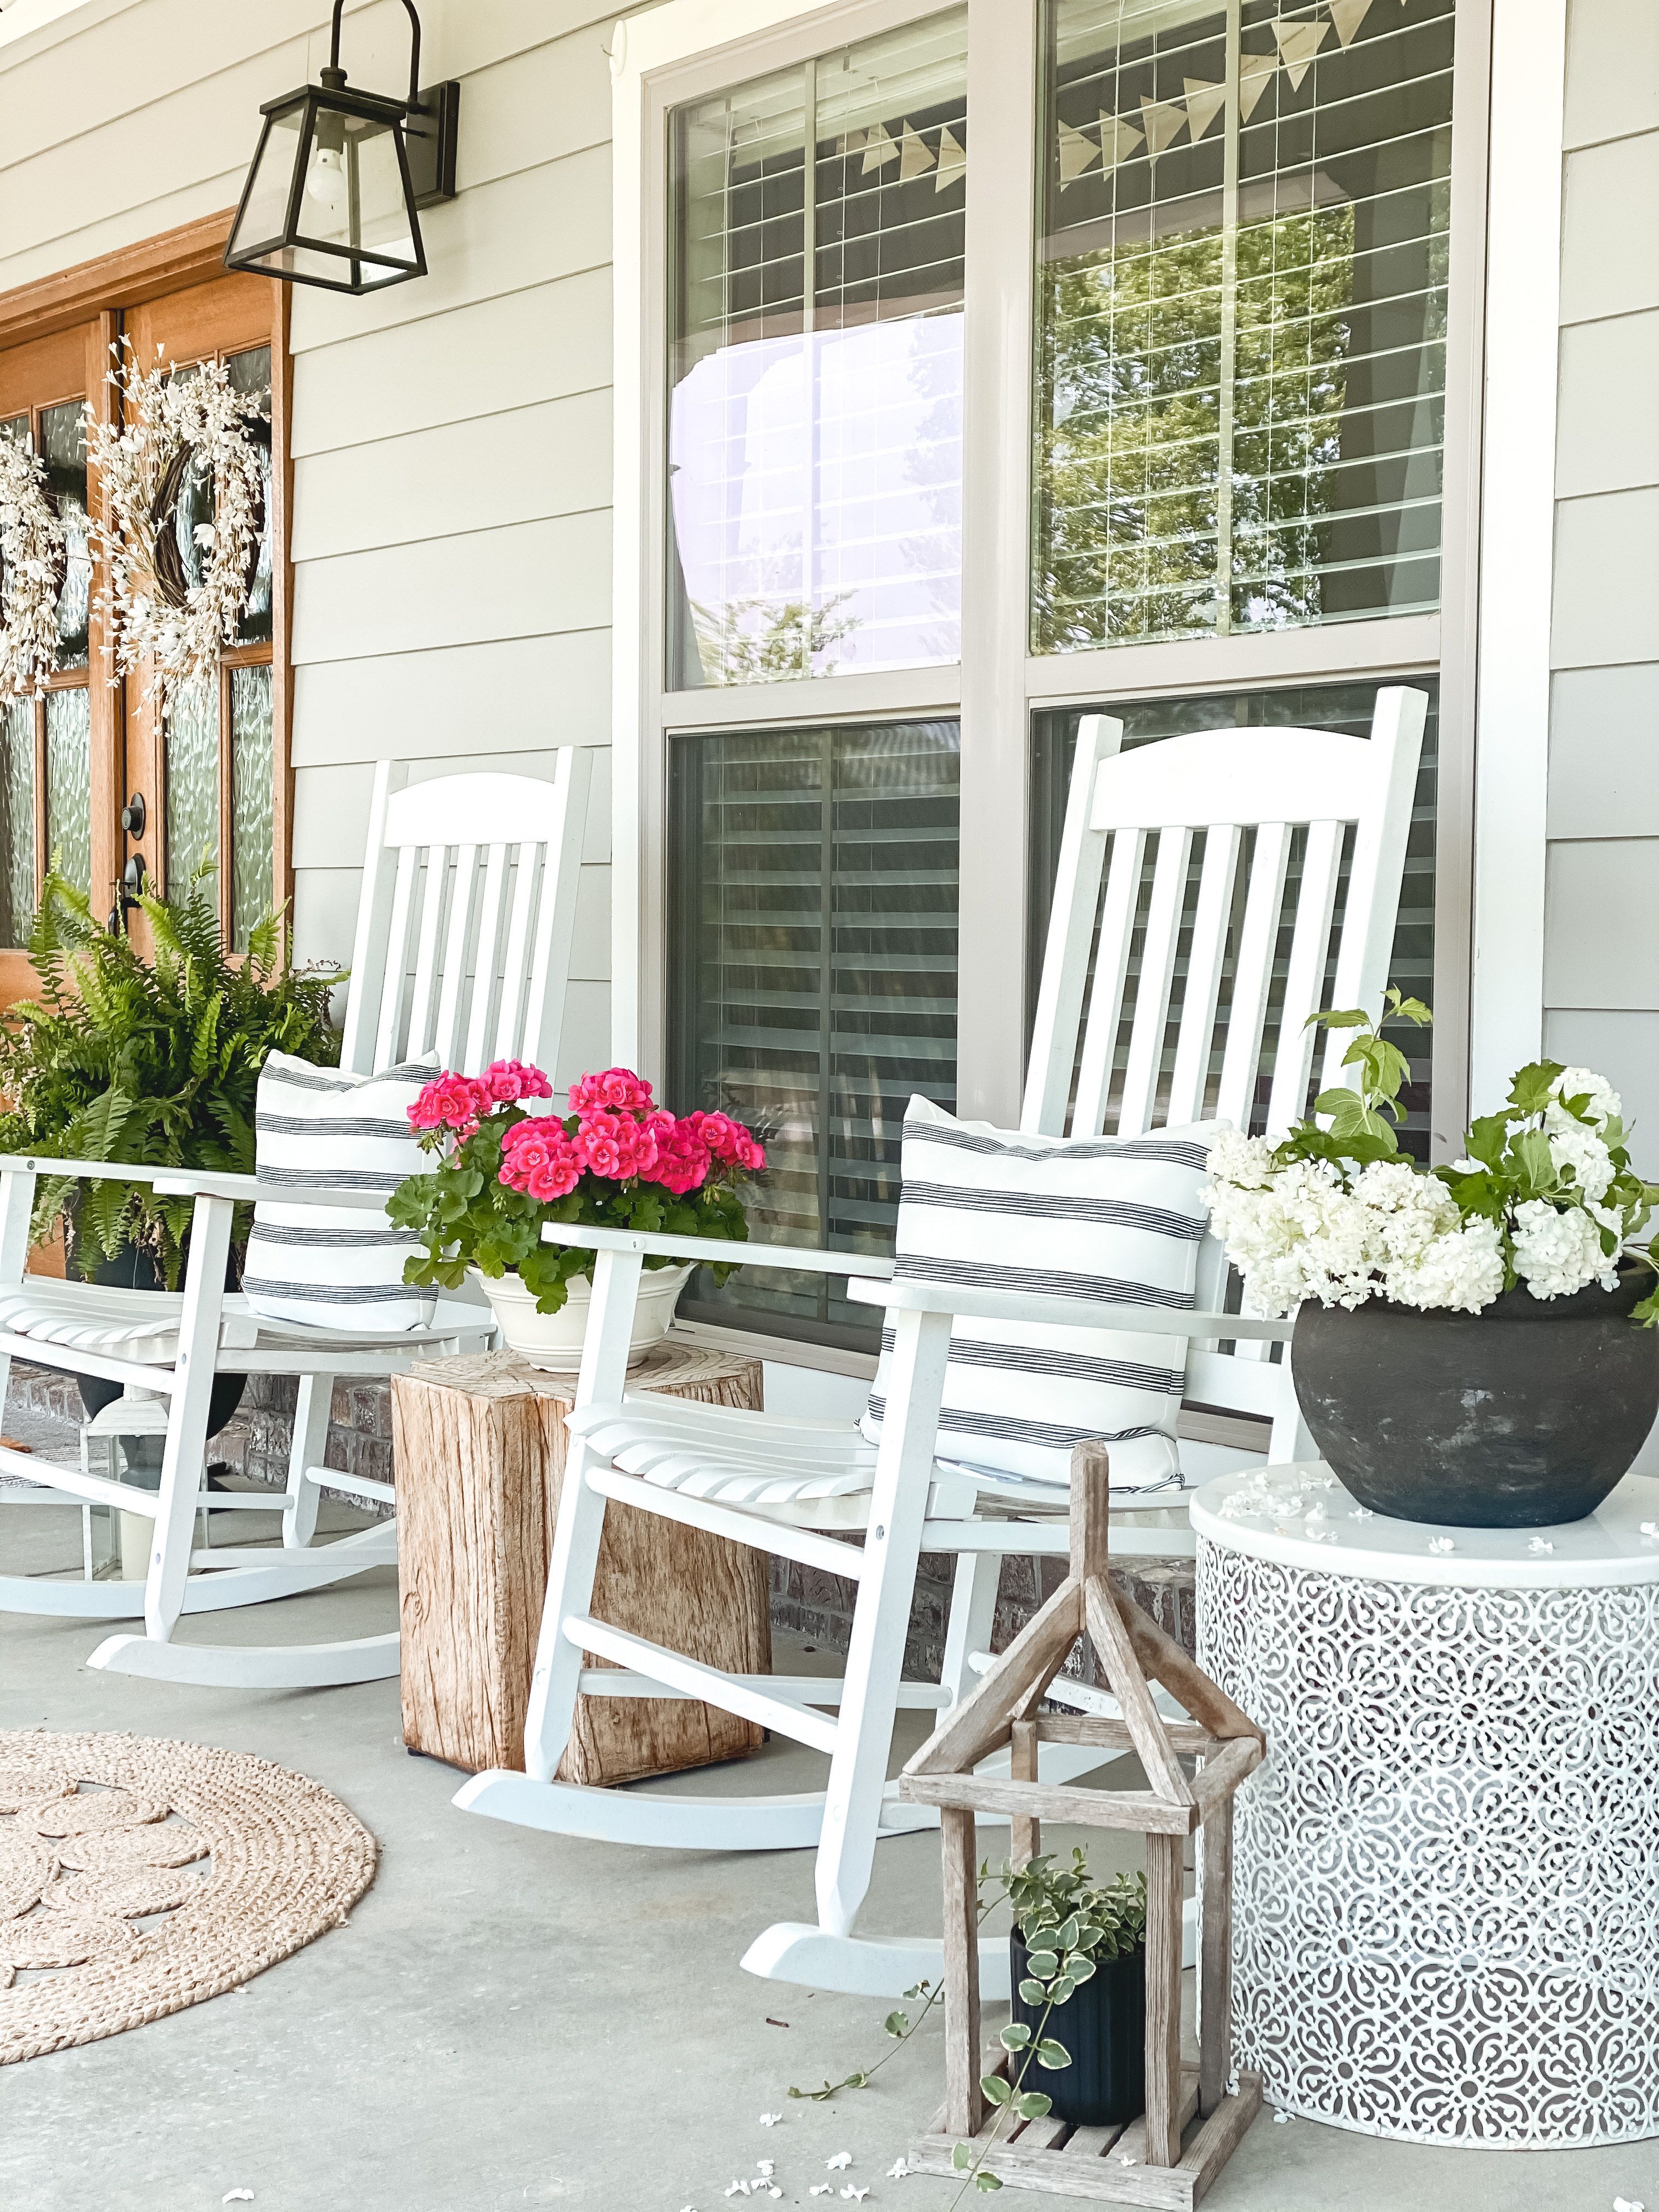 17 Welcoming Ways to Decorate Your Front Porch - Front Porch Ideas